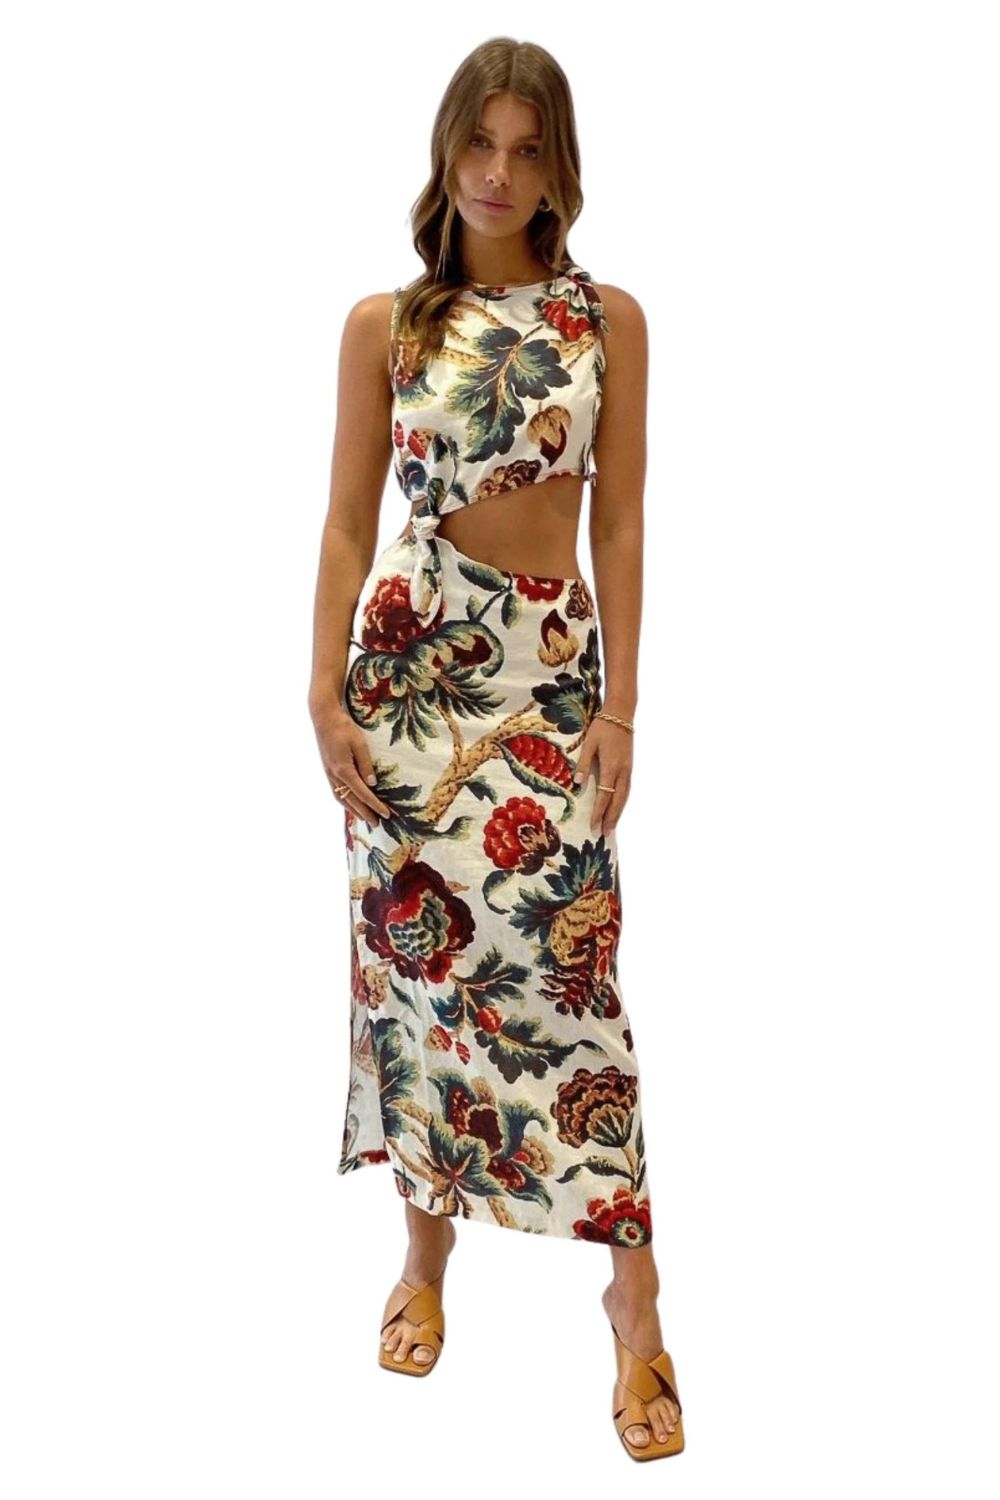 Sir The Label | Ambrosie Knot Dress | Floral